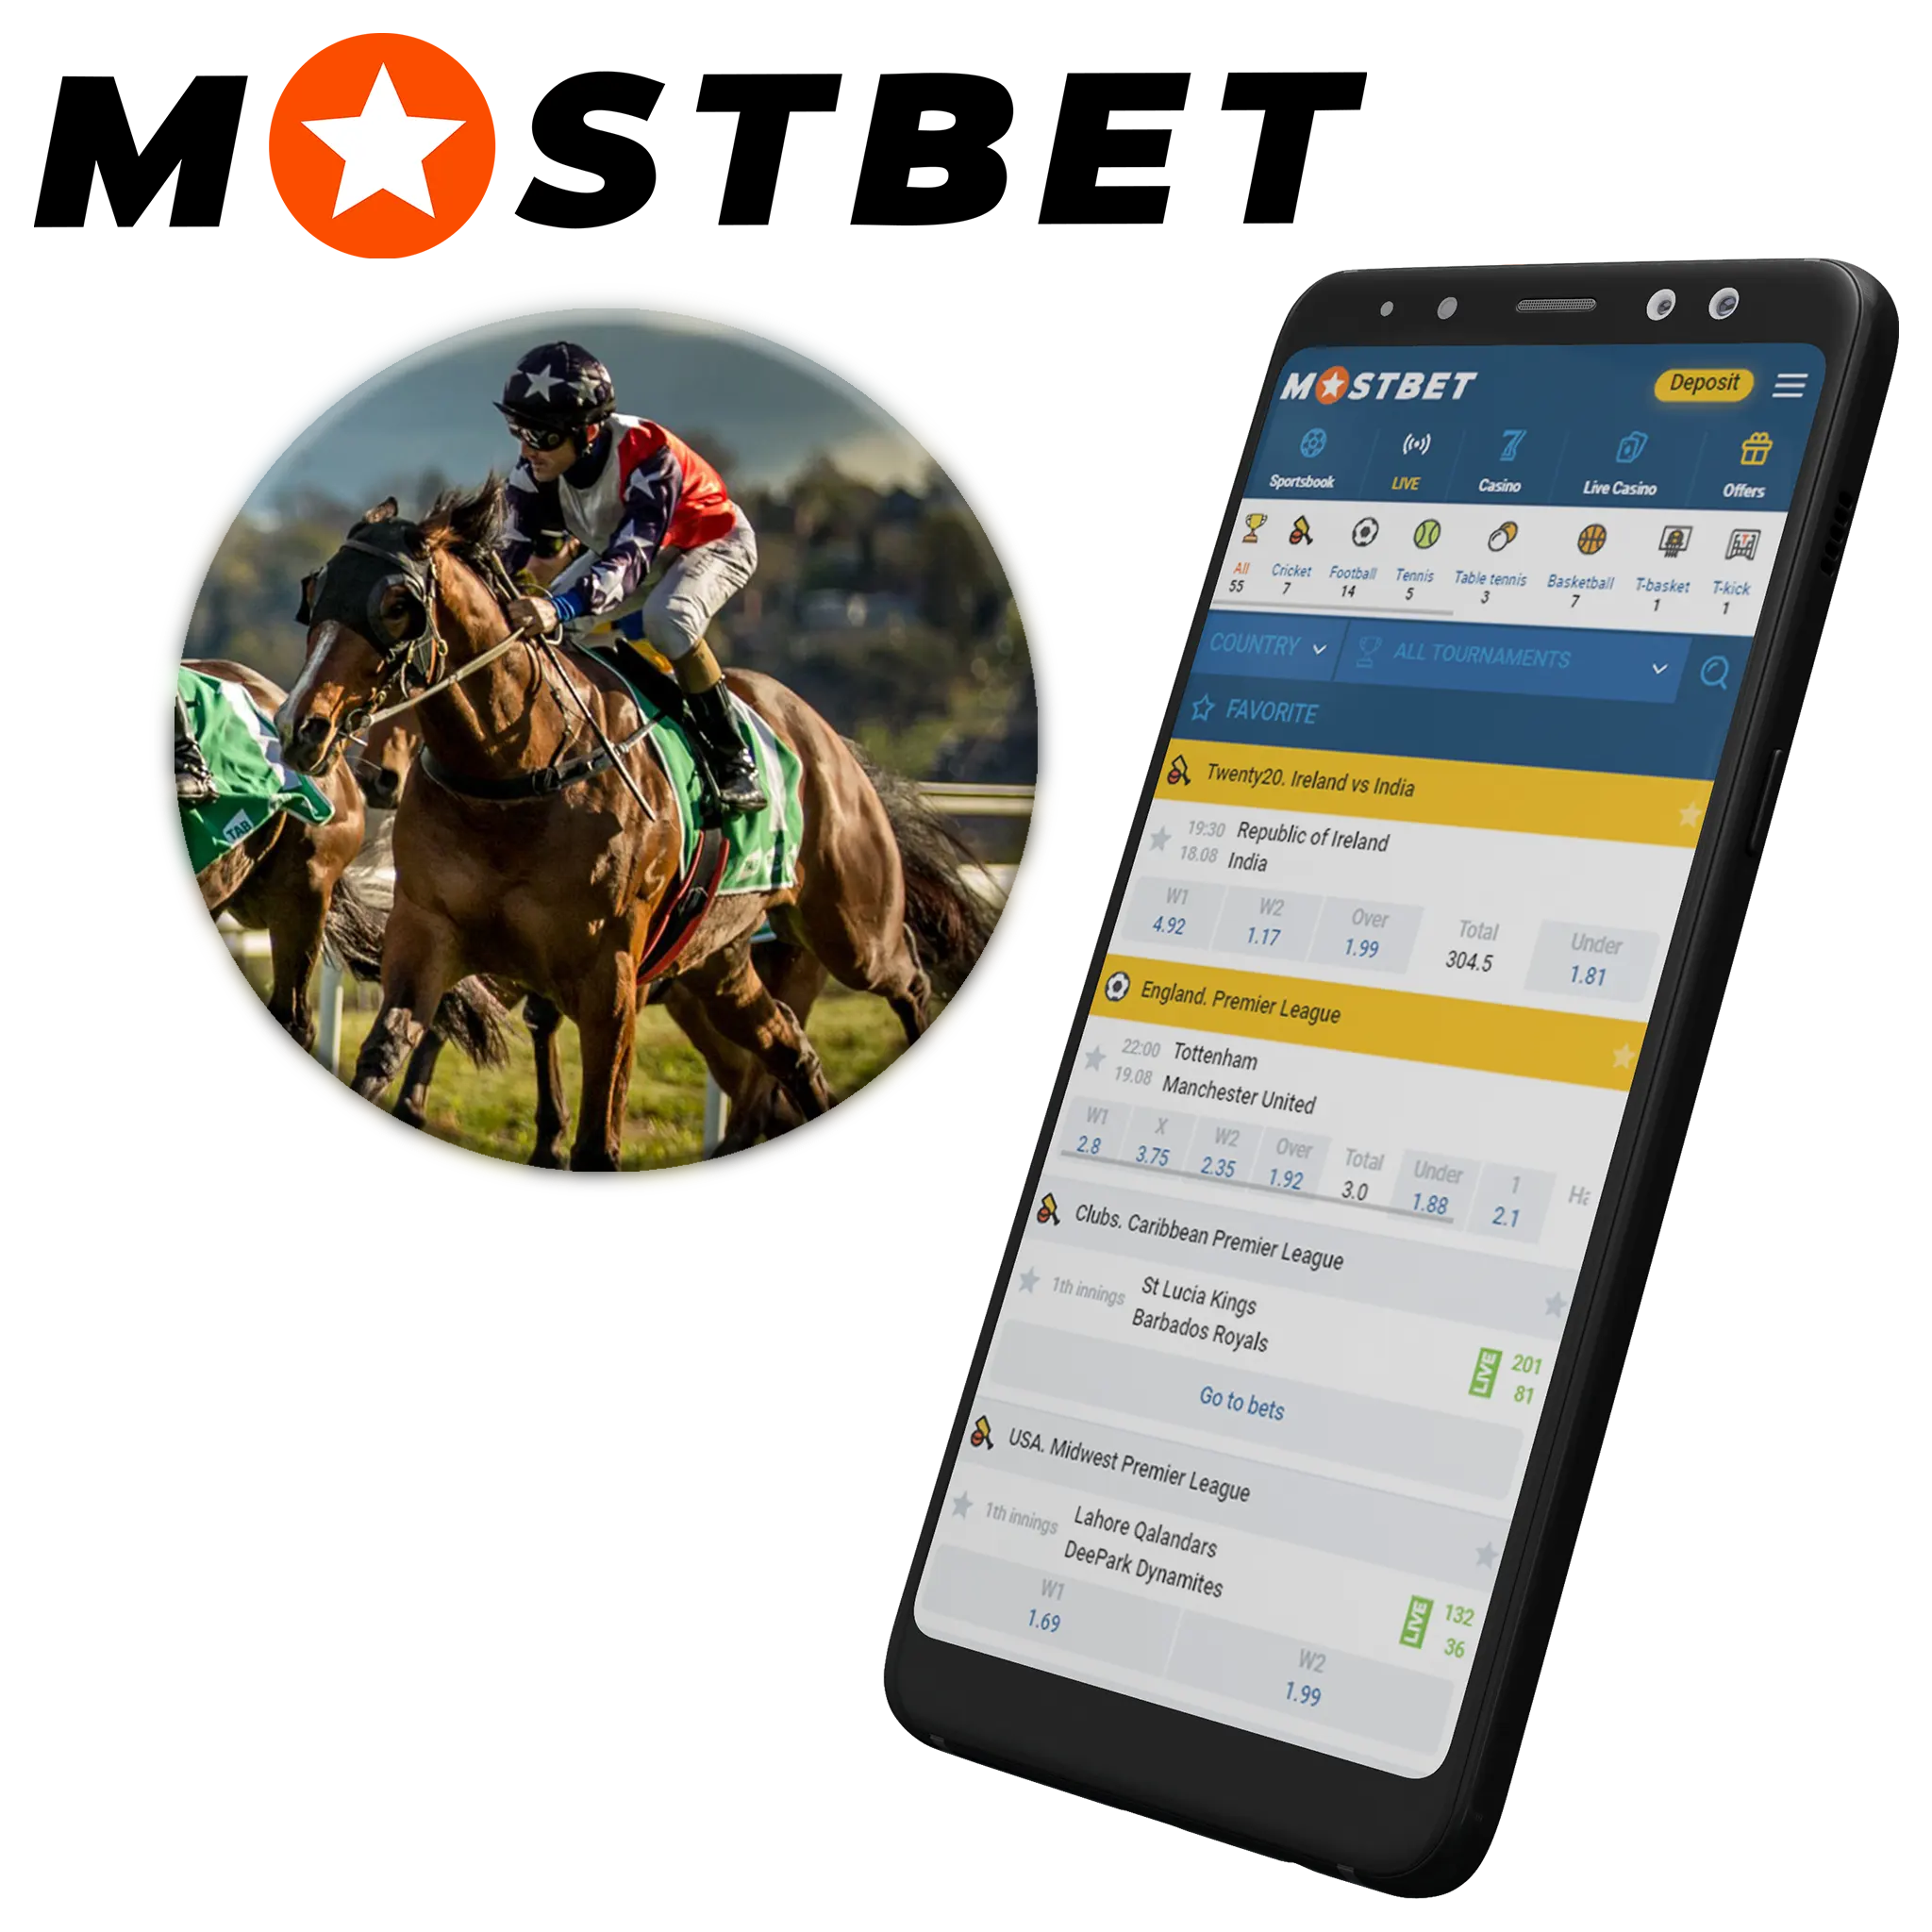 The Mostbet app has many advantages for horse racing online betting.